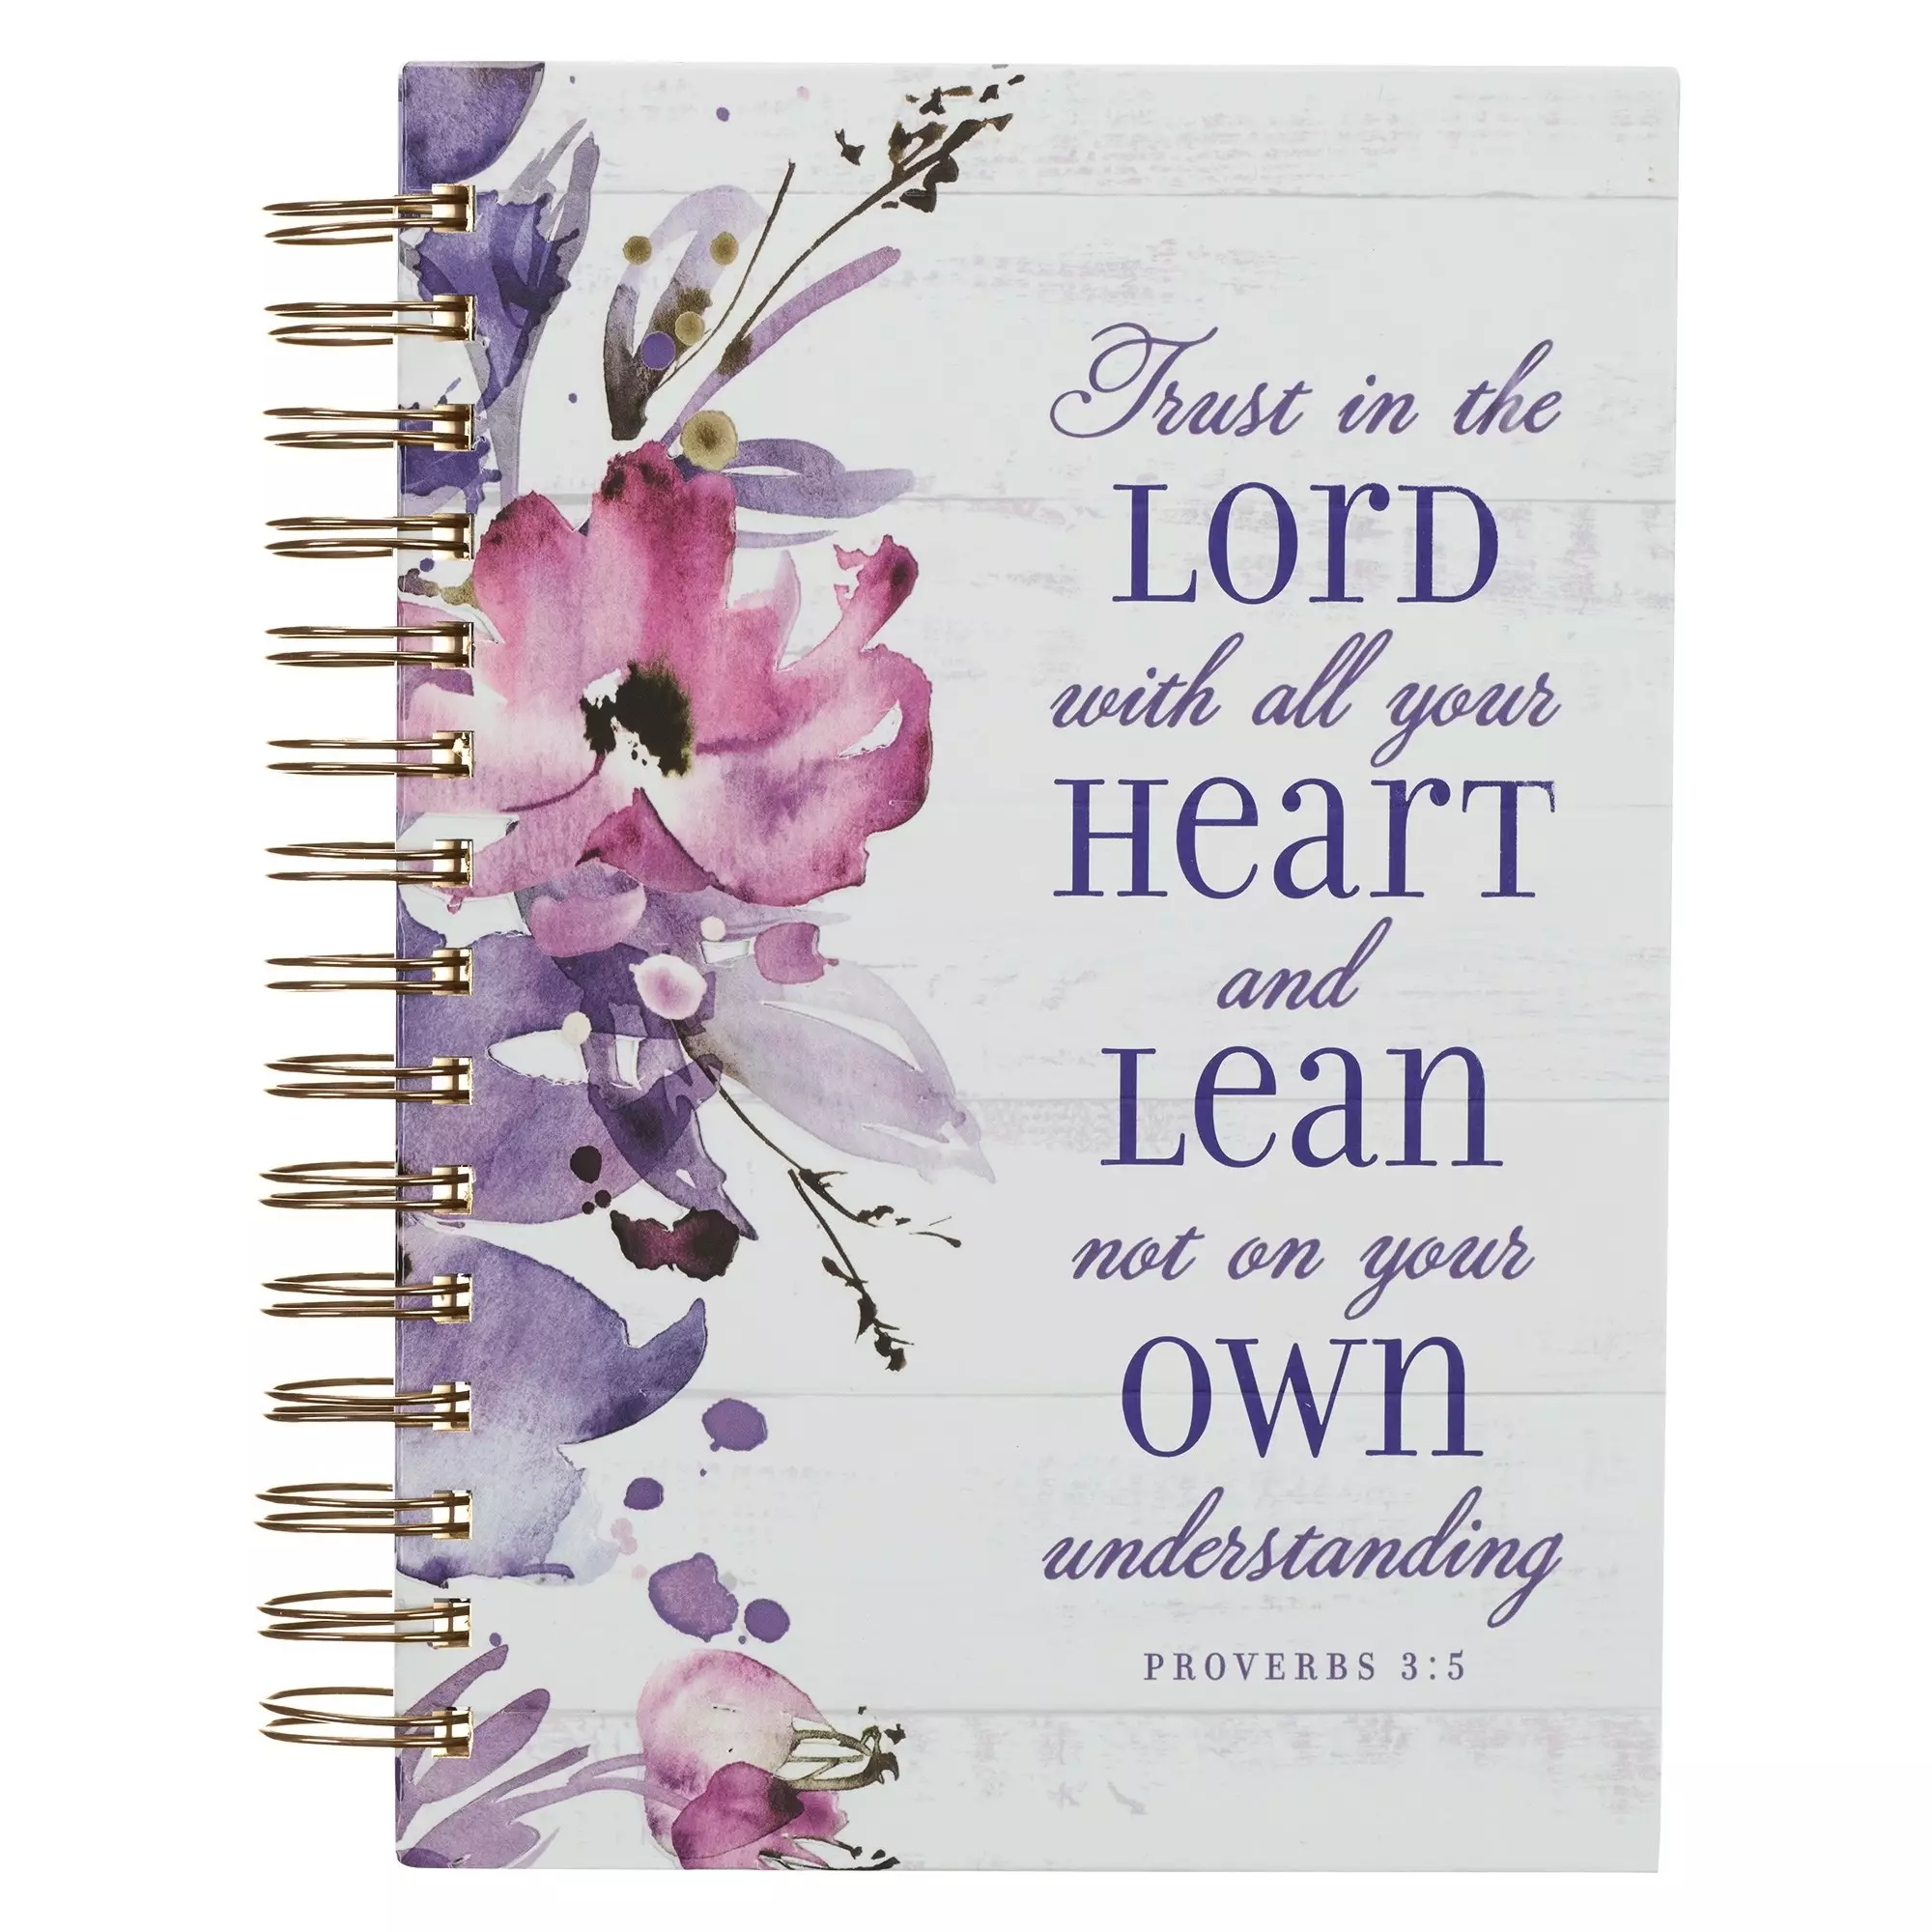 Journal Wirebound LG Trust In The Lord Prov. 3:5